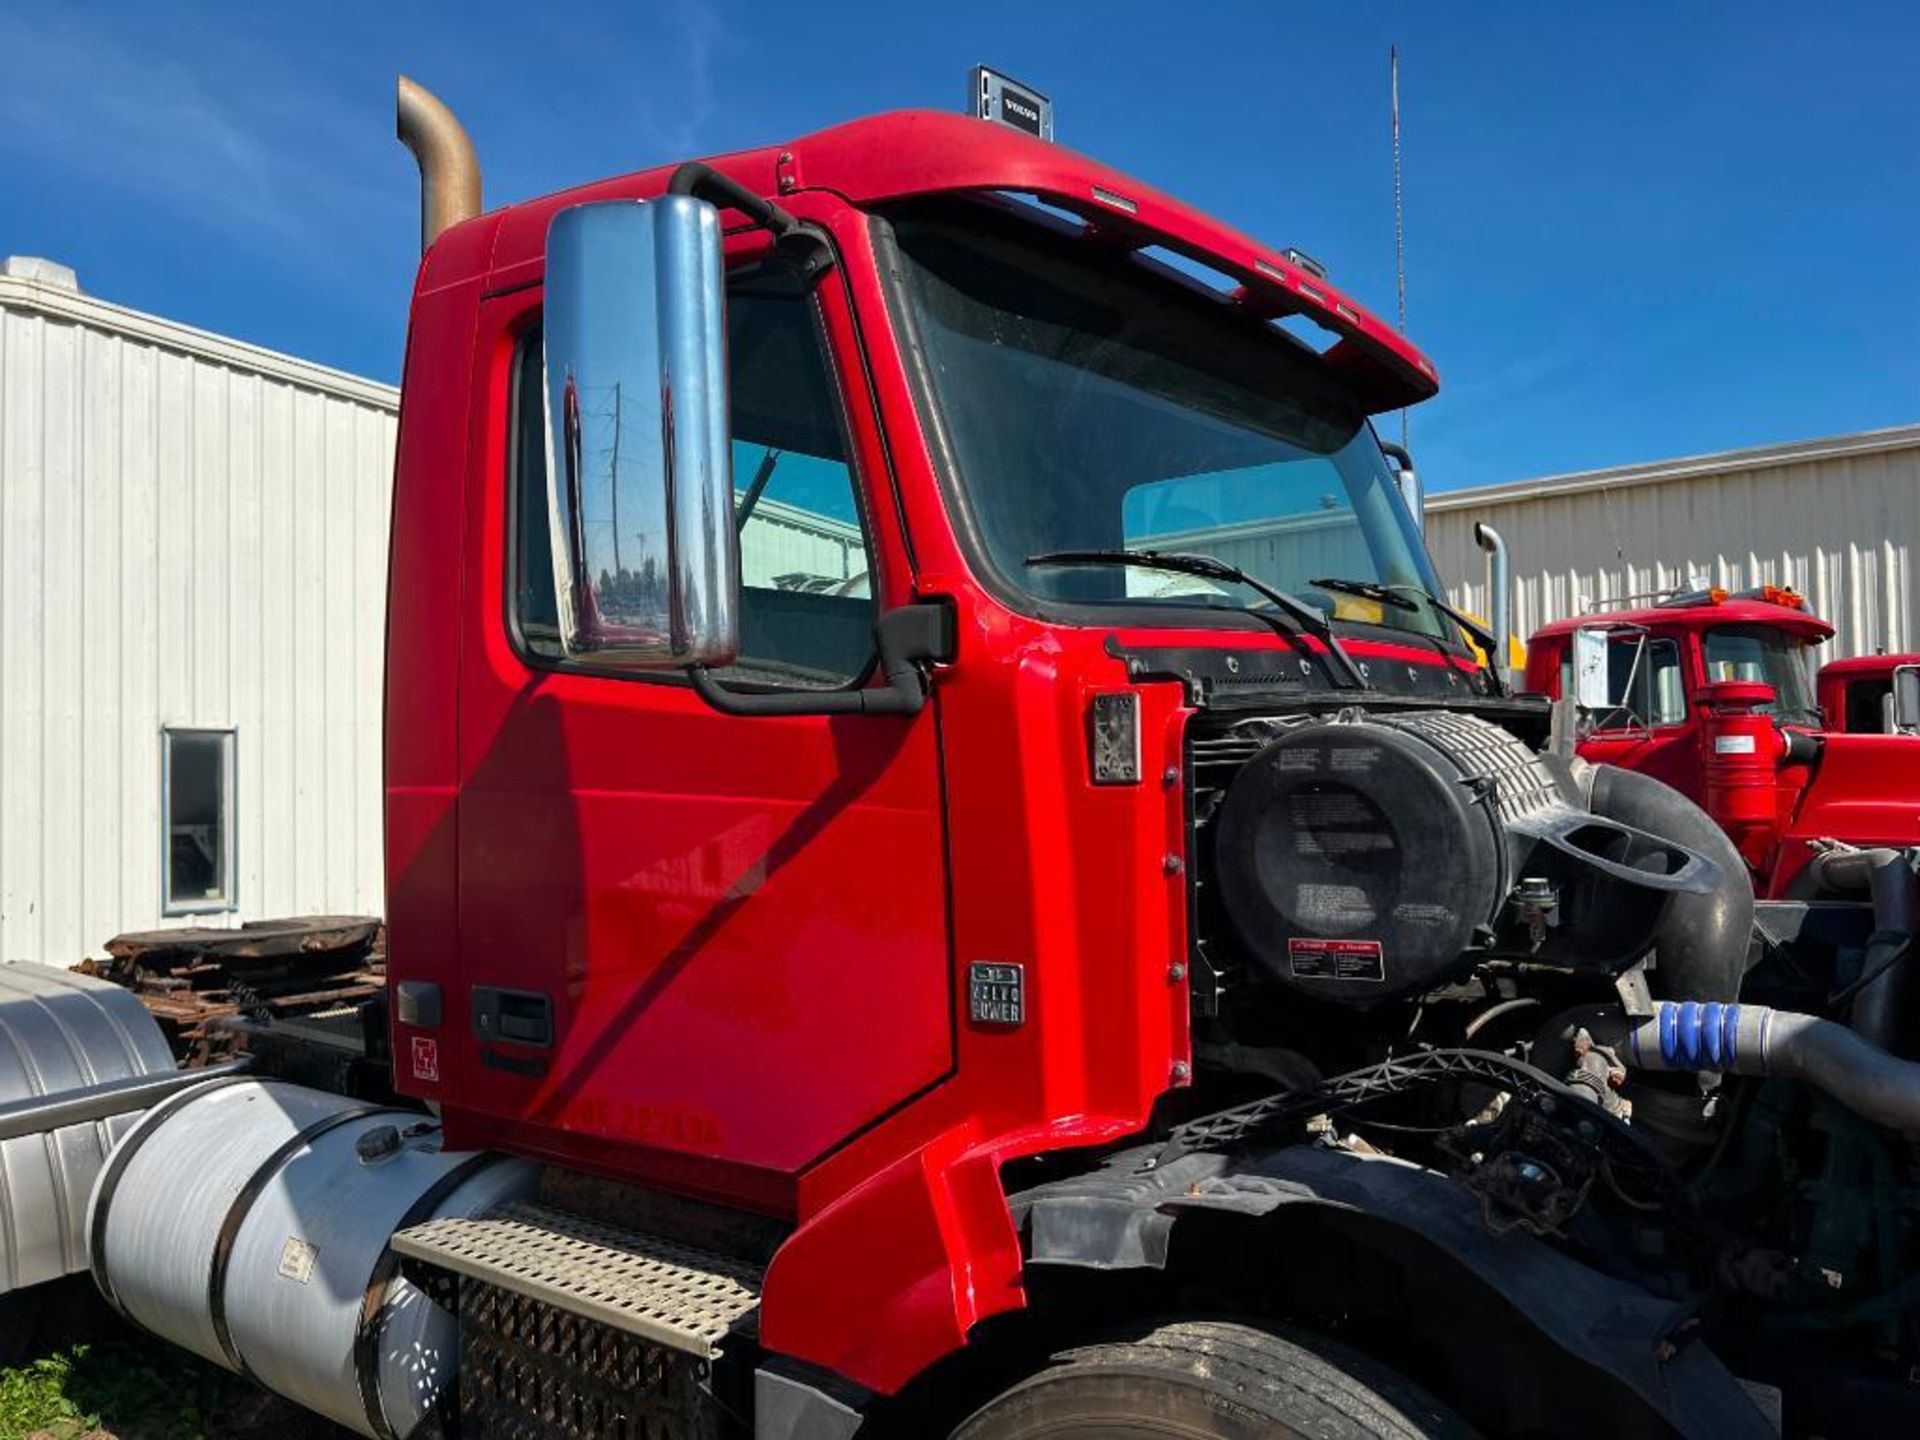 2009 Volvo D13 Tractor/Truck, miles showing 95,814, Easton Fuller 10 Speed Transmission, 435 HP - Image 31 of 31